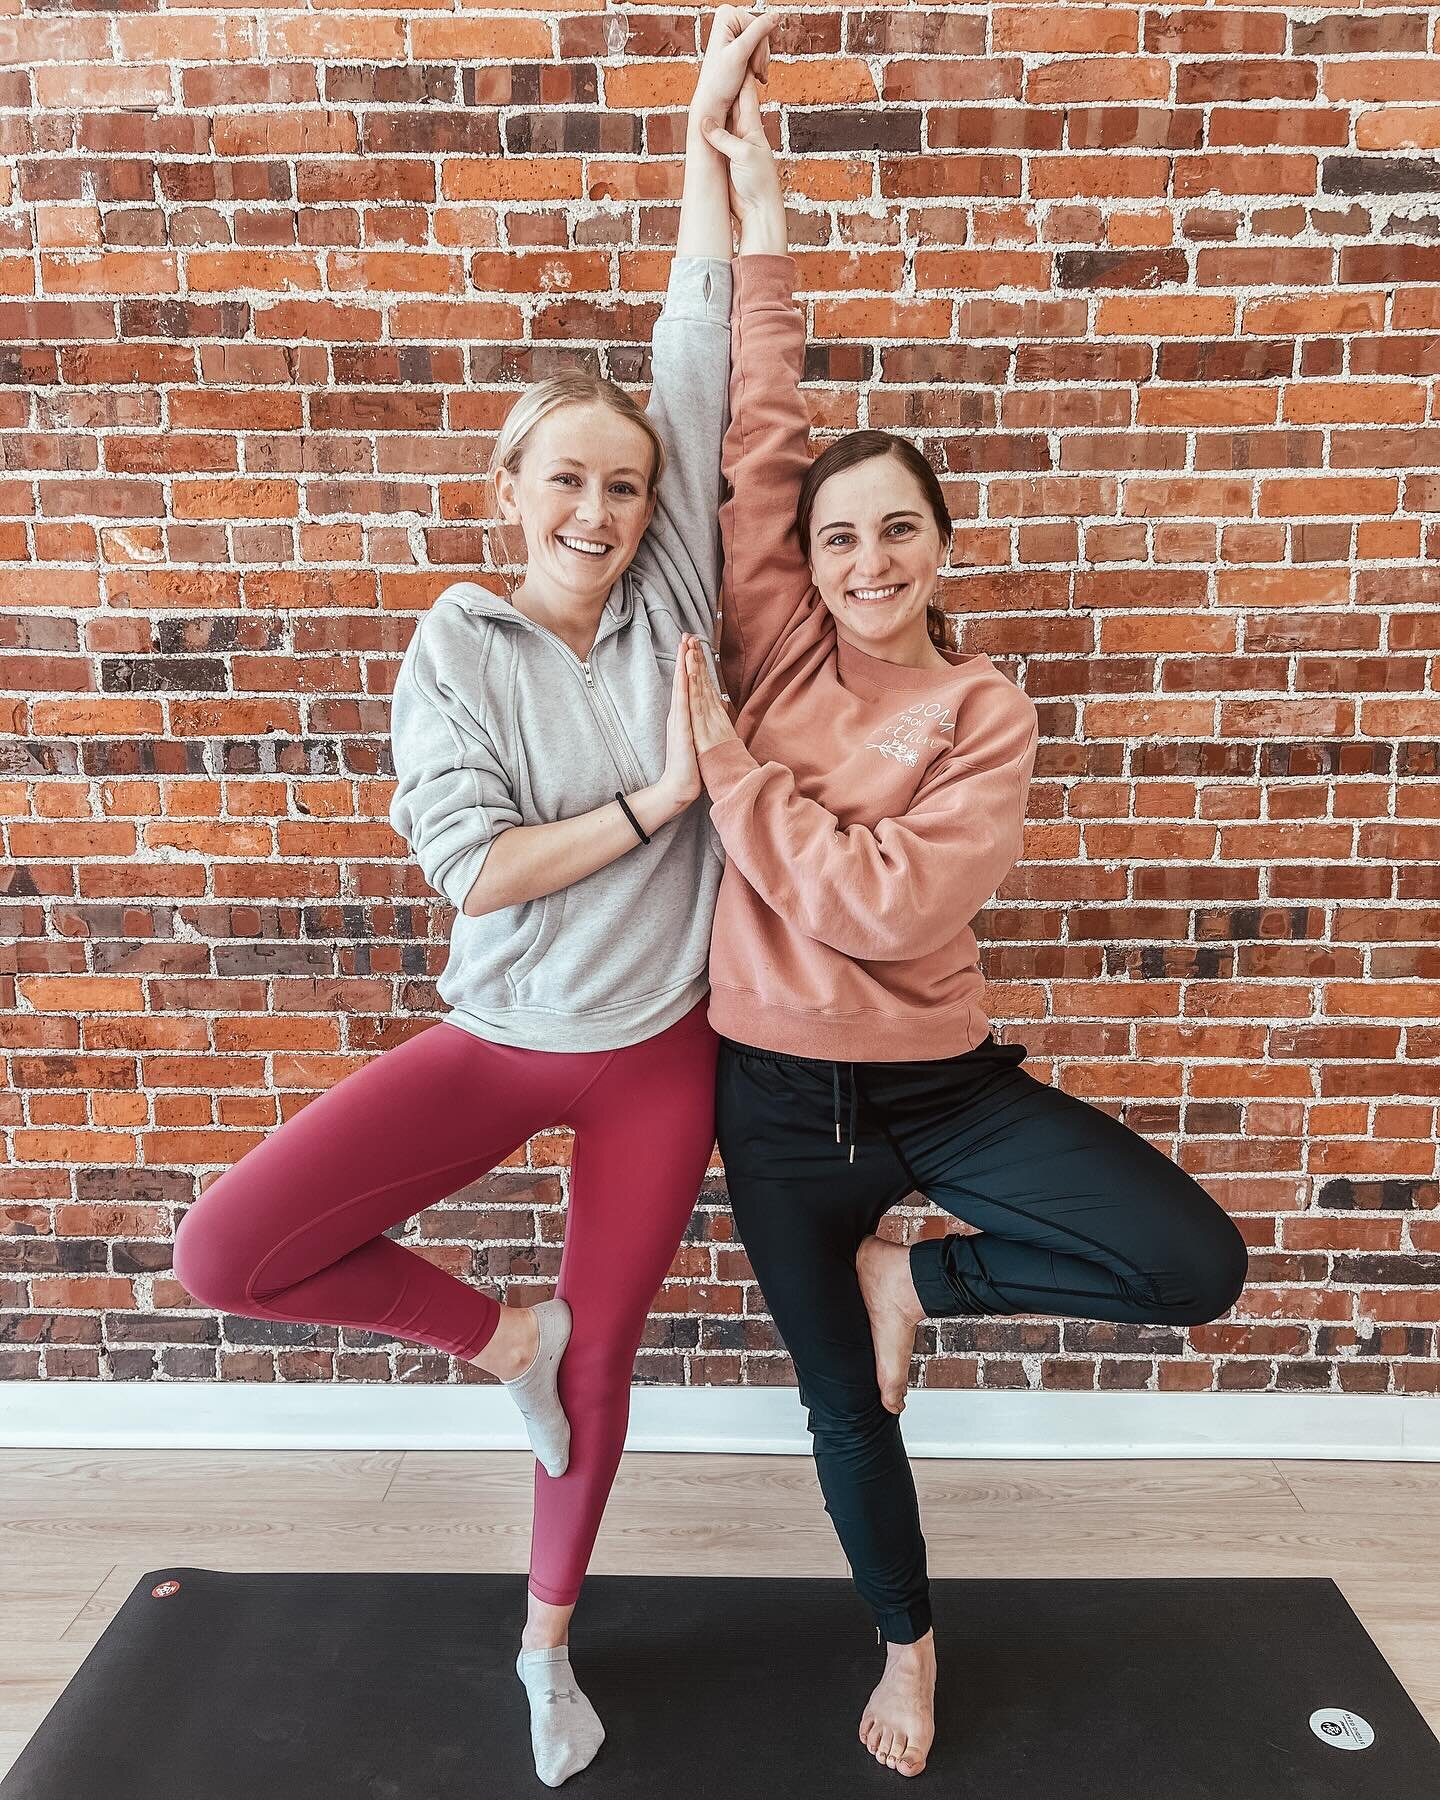 Reminder ‼️ Our Valentine&rsquo;s Day Partner Yoga is tomorrow night at 5:30!

Kick off your holiday with this super fun session designed to celebrate the joy of love, connection, and well-being. Perfect to do with your bestie or your special someone